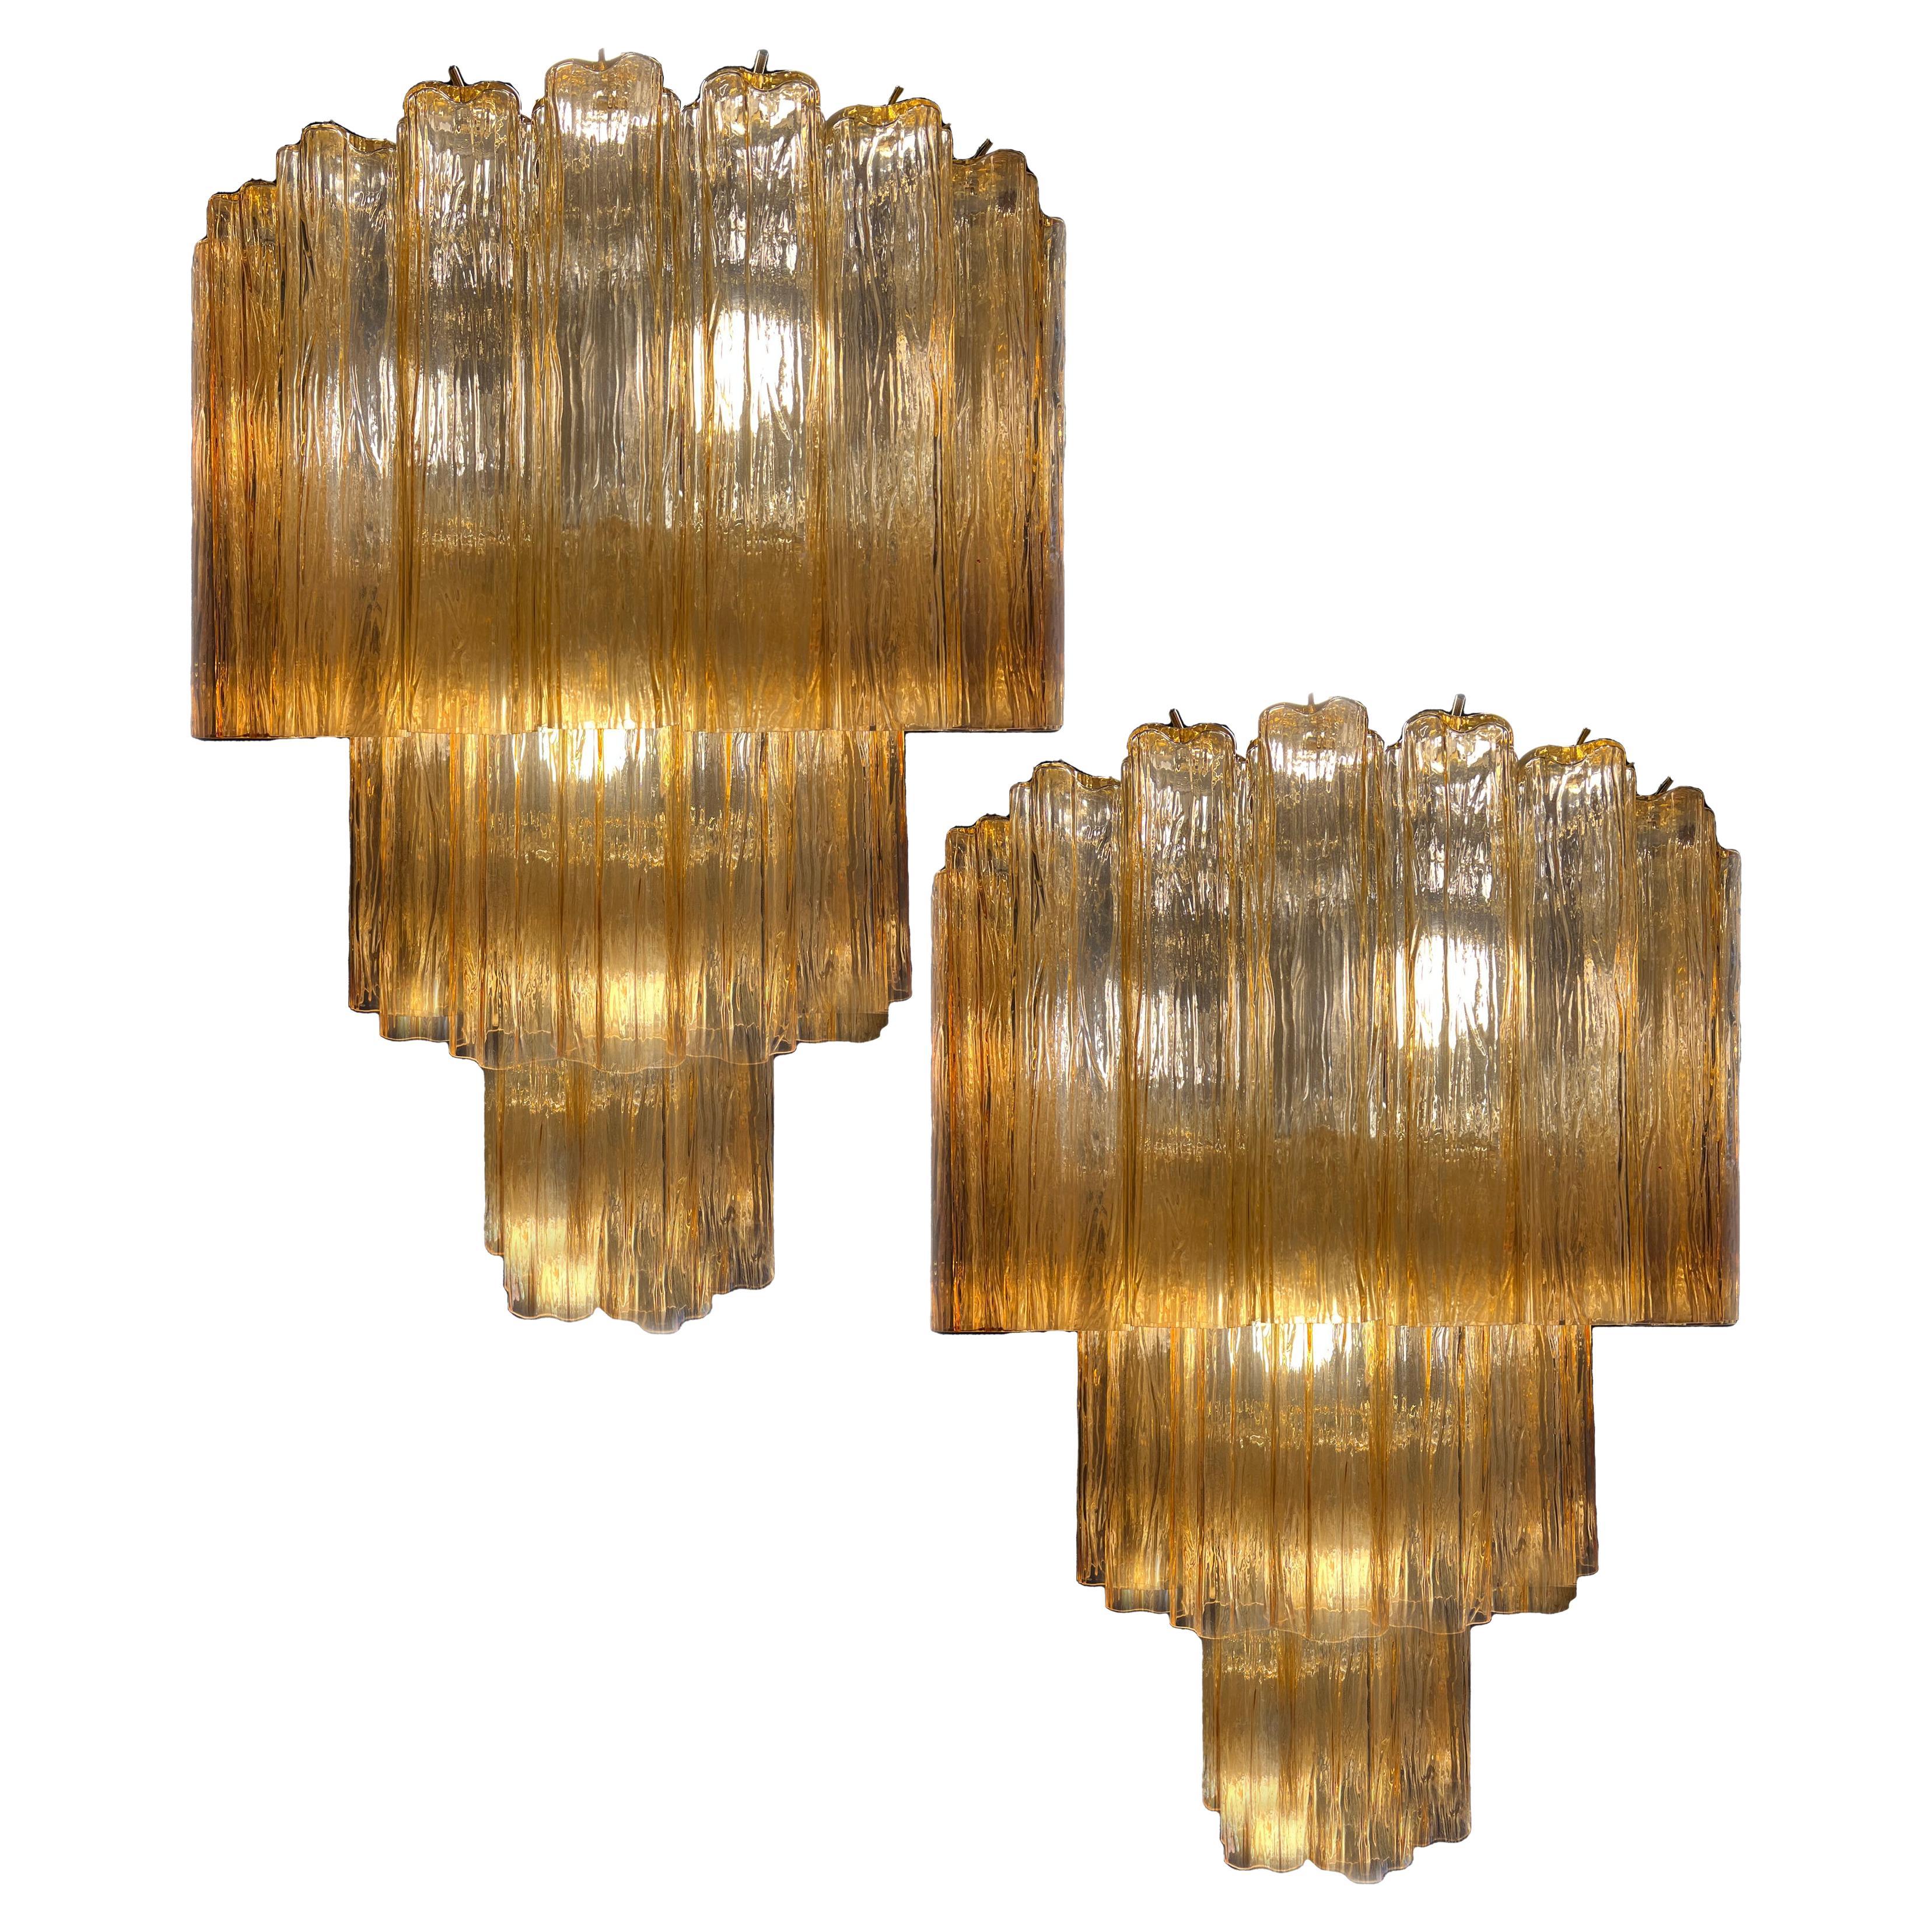 Elegant and refined Murano chandelier. The warm amber color vibrates with shades of gold, the effect is magnetic and sophisticated. The height without chain is 112 cm. It can be made to the dimensions requested by the customer.